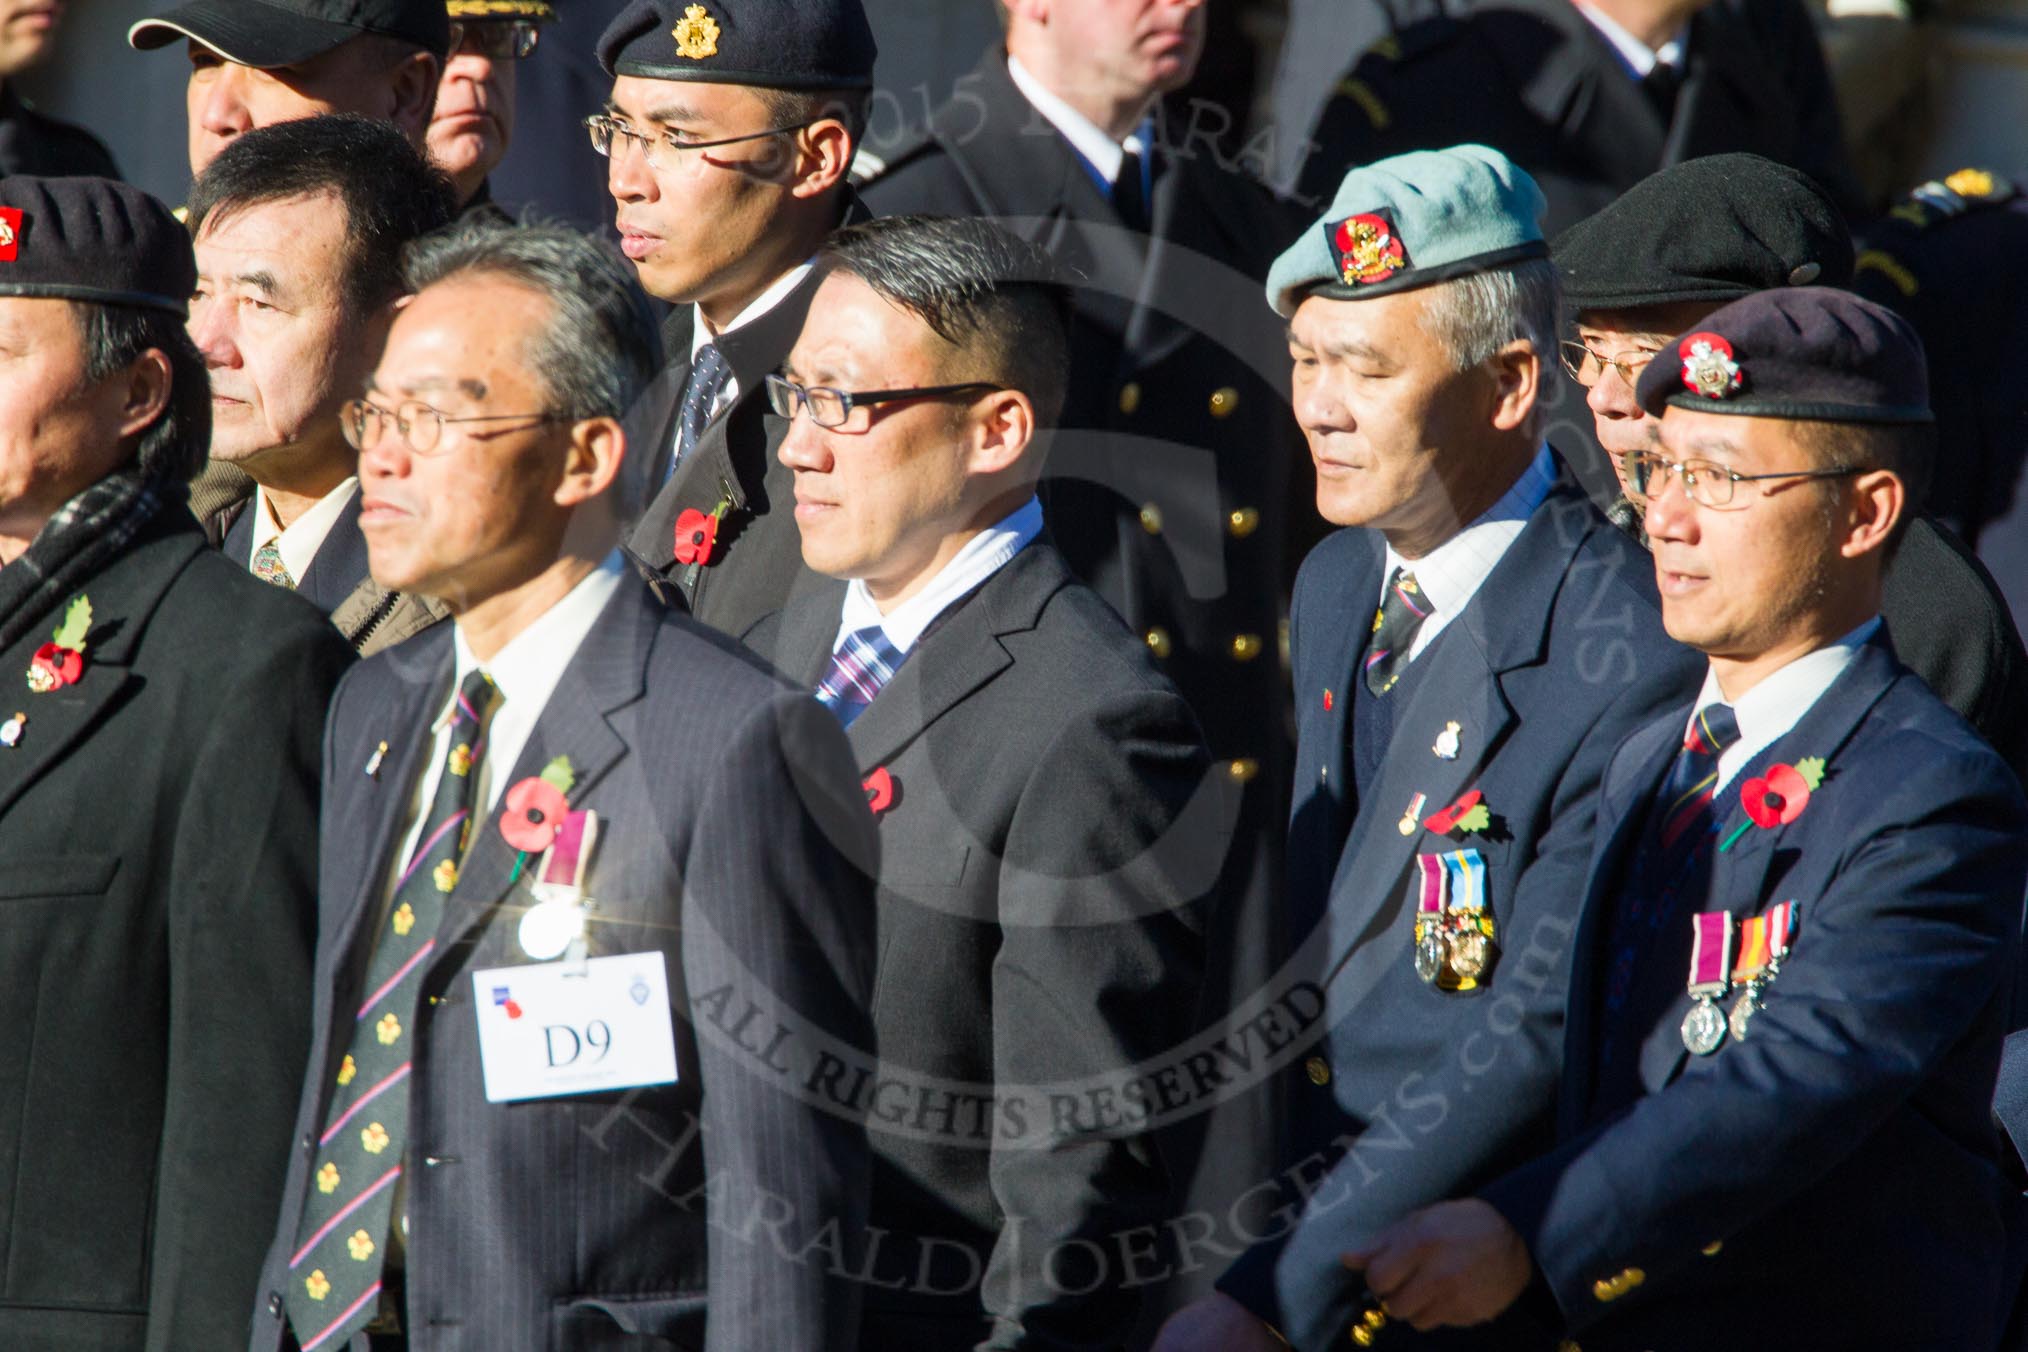 Remembrance Sunday Cenotaph March Past 2013: D9 - Hong Kong Ex-Servicemen's Association (UK Branch)..
Press stand opposite the Foreign Office building, Whitehall, London SW1,
London,
Greater London,
United Kingdom,
on 10 November 2013 at 11:39, image #78